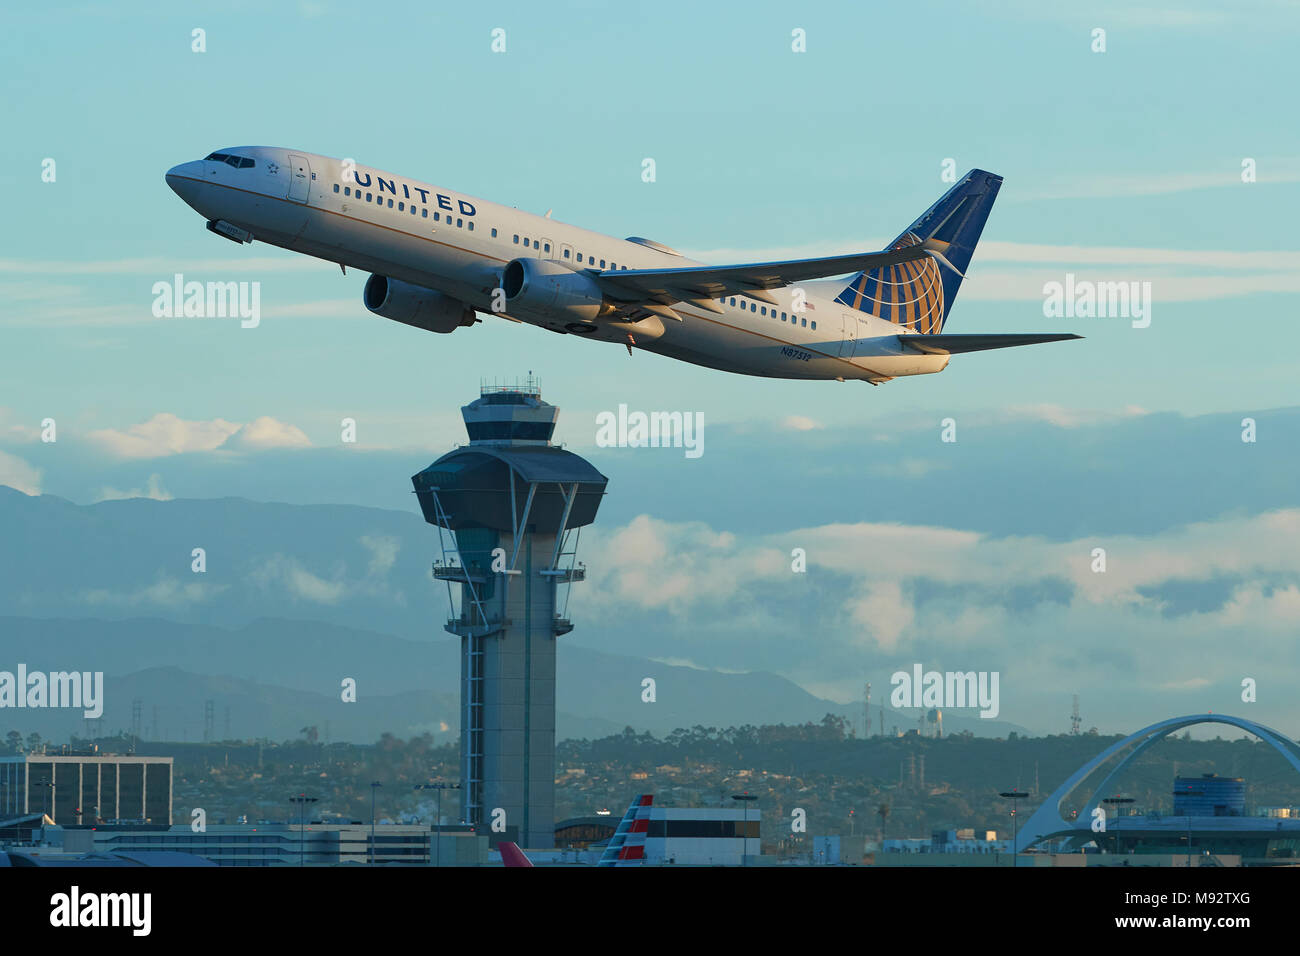 United Airlines Boeing 737-900 Jet Airliner Taking Off From Los Angeles International Airport, LAX. The Control Tower And San Gabriel Mountains Behind Stock Photo